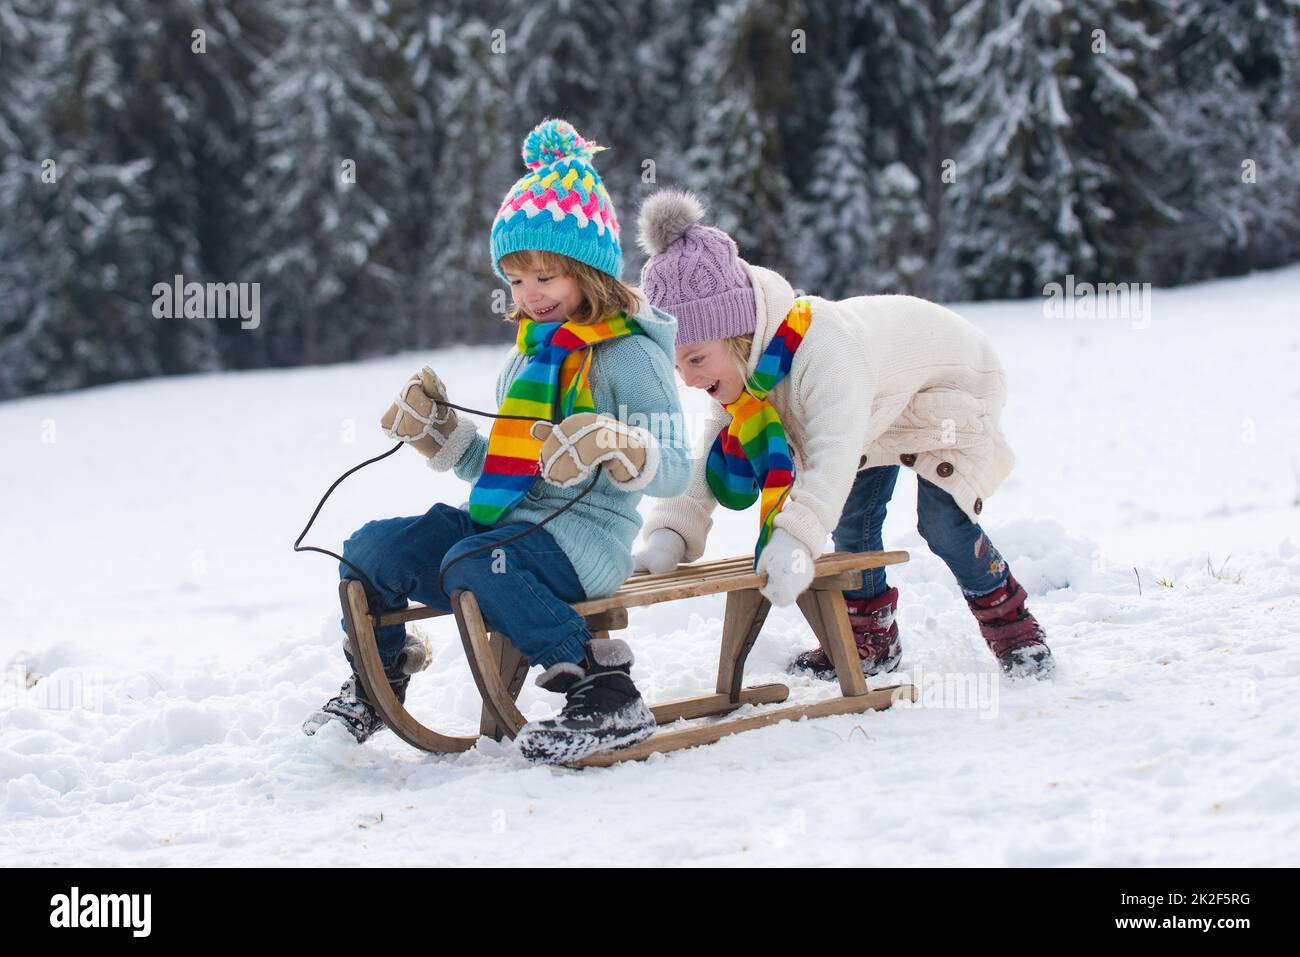 Children sledding, riding a sledge. Children son and daughter play in snow in winter. Outdoor kids fun for vacation. New Year wallpaper, Christmas Stock Photo